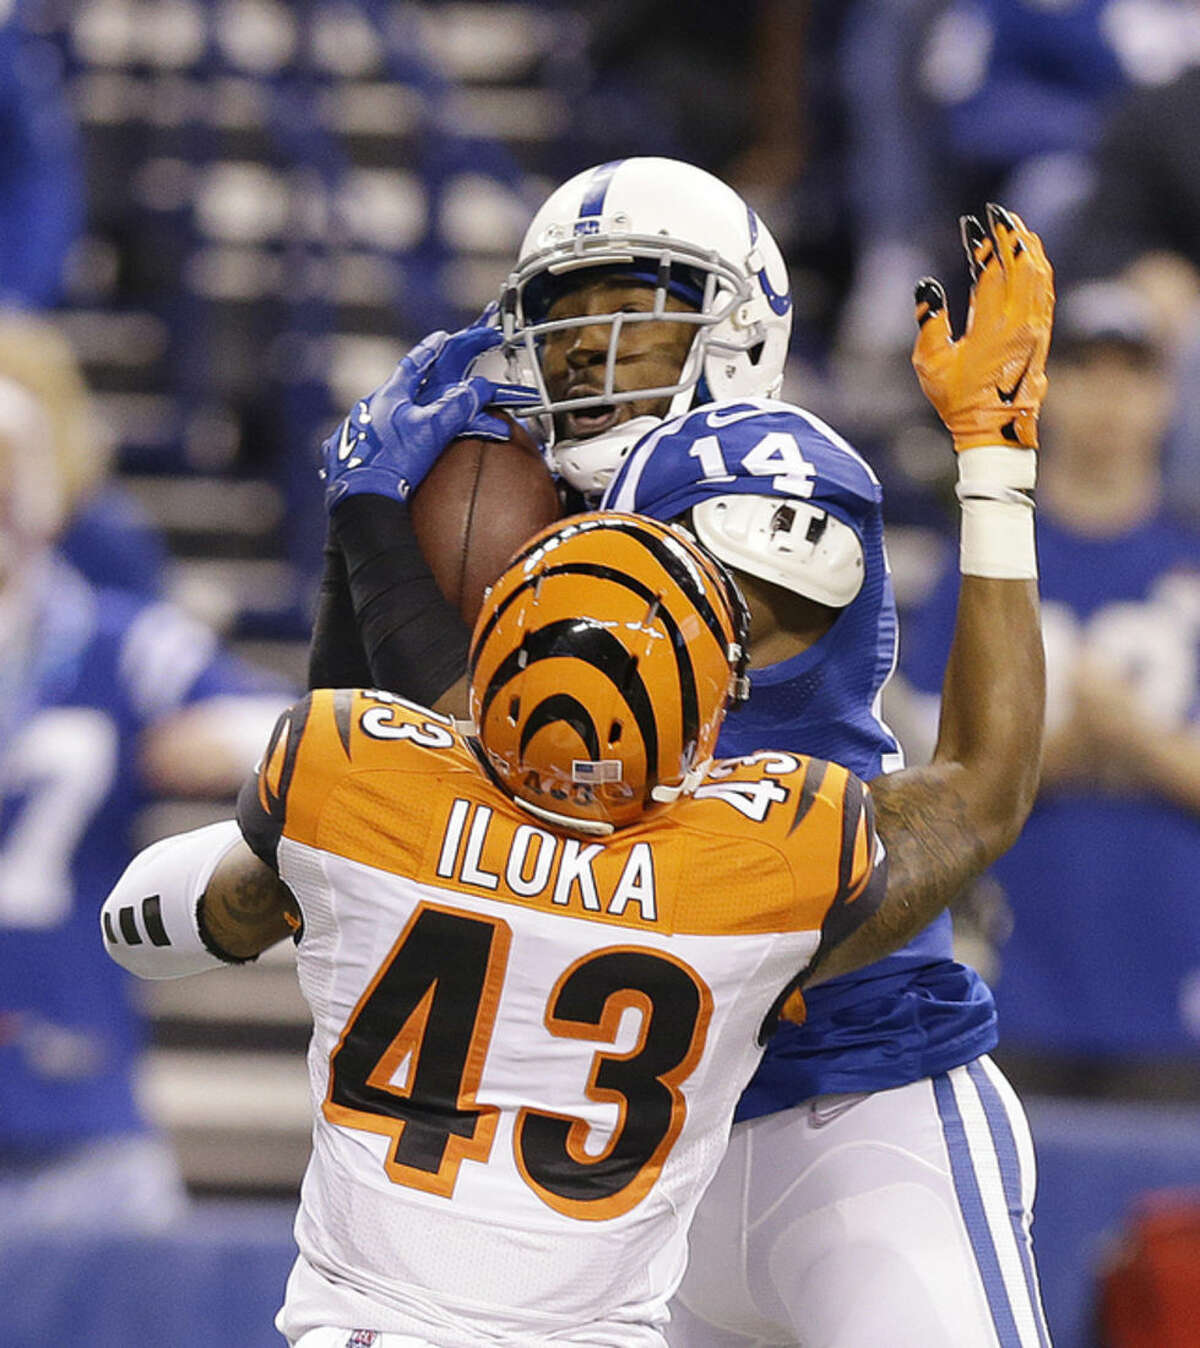 Indianapolis Colts' Hakeem Nicks (14) makes a catch against Cincinnati Bengals' George Iloka (43) during the first half of an NFL wildcard playoff football game, Sunday, Jan. 4, 2015, in Indianapolis. (AP Photo/Michael Conroy)